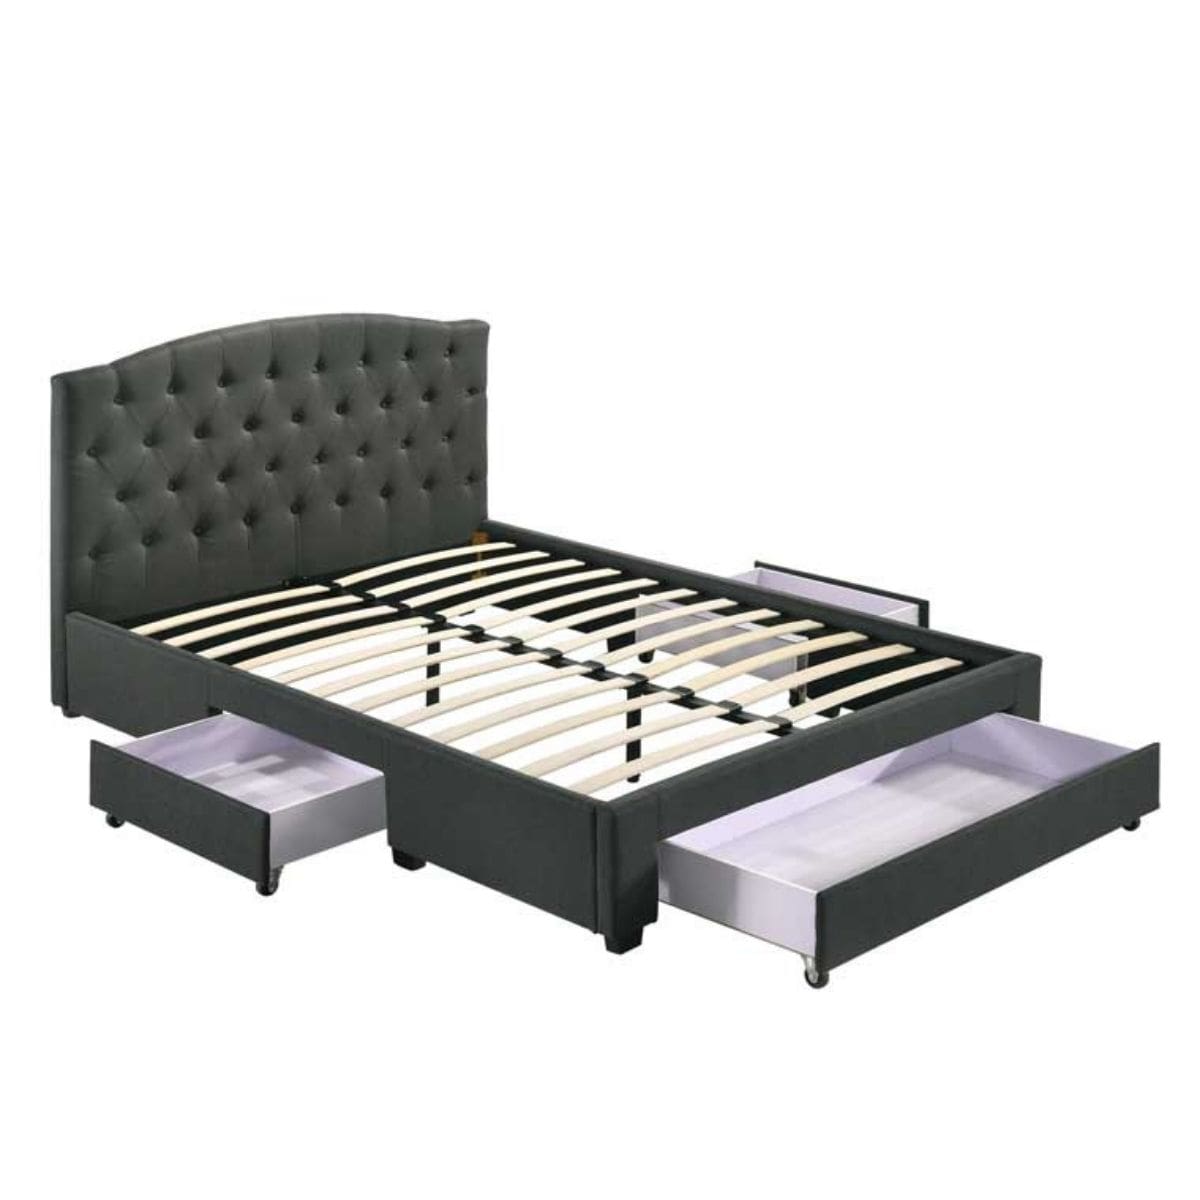 French Provincial Modern Fabric Platform Bed Base Frame with Storage Drawers Queen Charcoal - Newstart Furniture